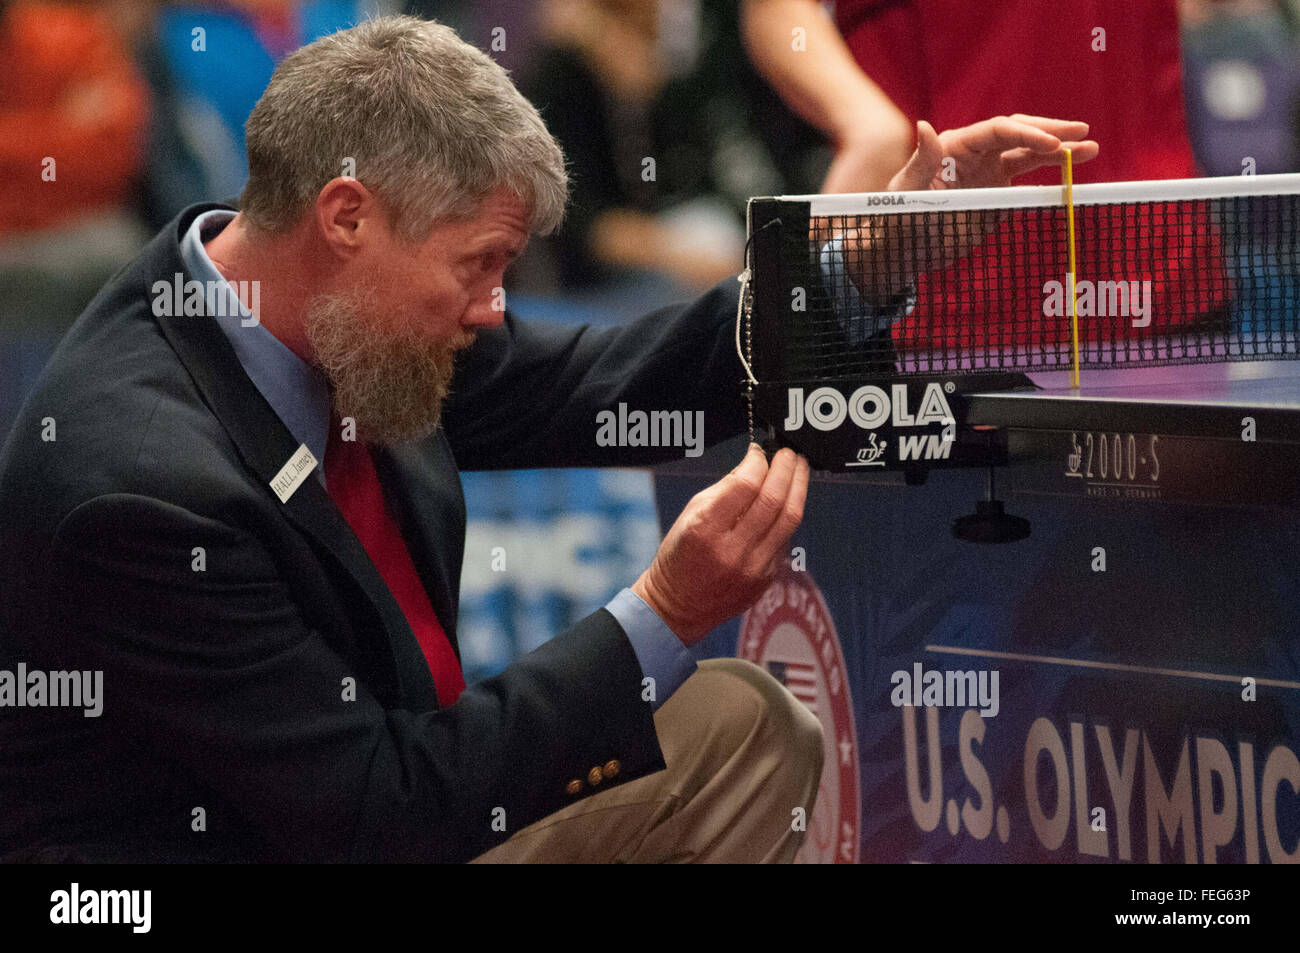 Greensboro, North Carolina, US. 5th Feb, 2016. Feb. 5, 2016 - Greensboro, N.C., USA - Umpire JAMEY HALL inspects the next before the start of the men's final on day two of the 2016 U.S. Olympic Table Tennis Trials. The top three men and women from the trials move on to compete in April at the 2016 North America Olympic Qualification tournament in Ontario, Canada. The 2016 Summer Olympics will be held in Rio De Janeiro, Brazil, Aug. 5-21. © Timothy L. Hale/ZUMA Wire/Alamy Live News Stock Photo